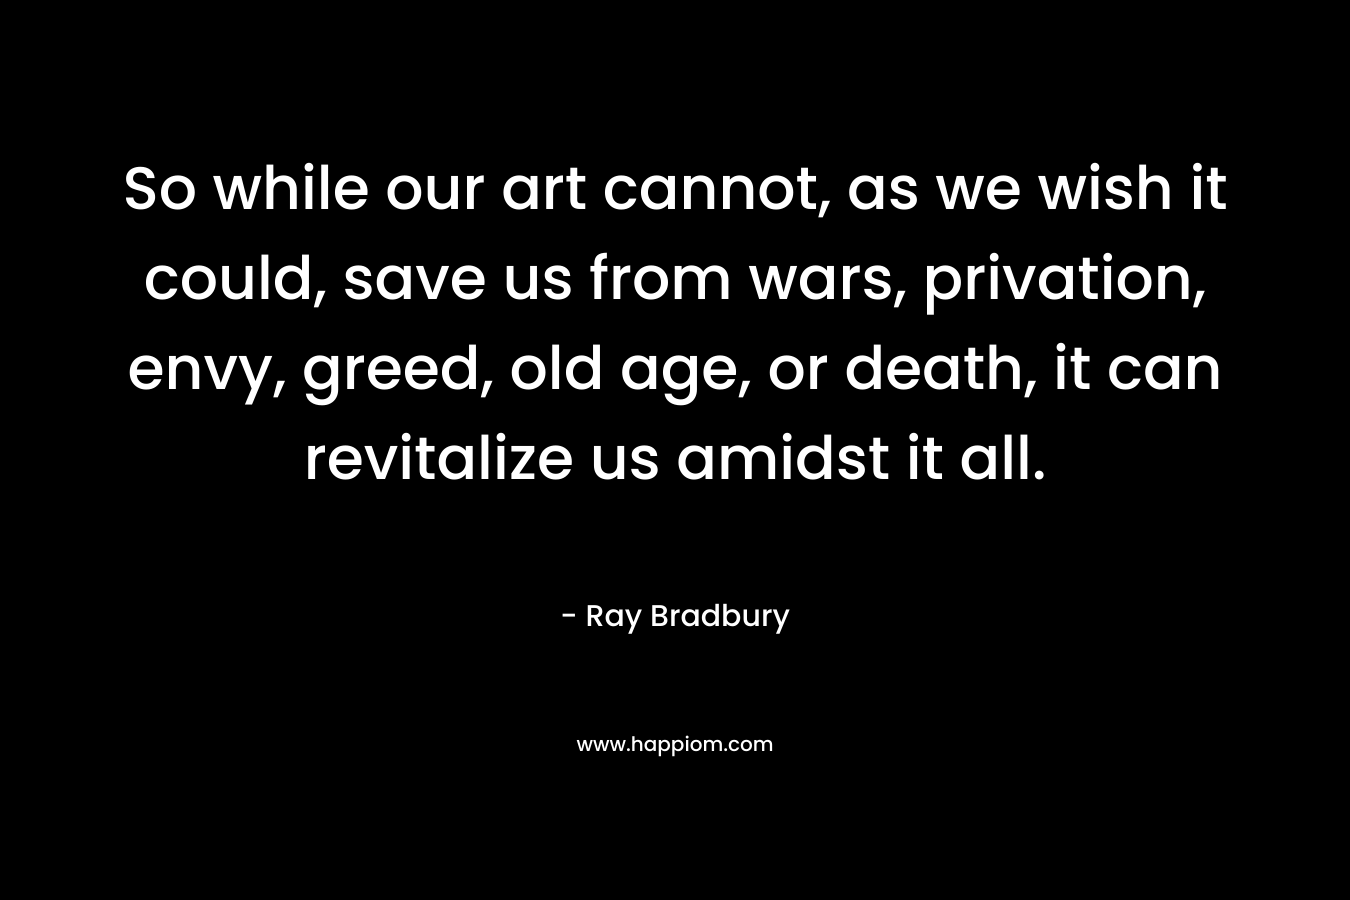 So while our art cannot, as we wish it could, save us from wars, privation, envy, greed, old age, or death, it can revitalize us amidst it all. – Ray Bradbury